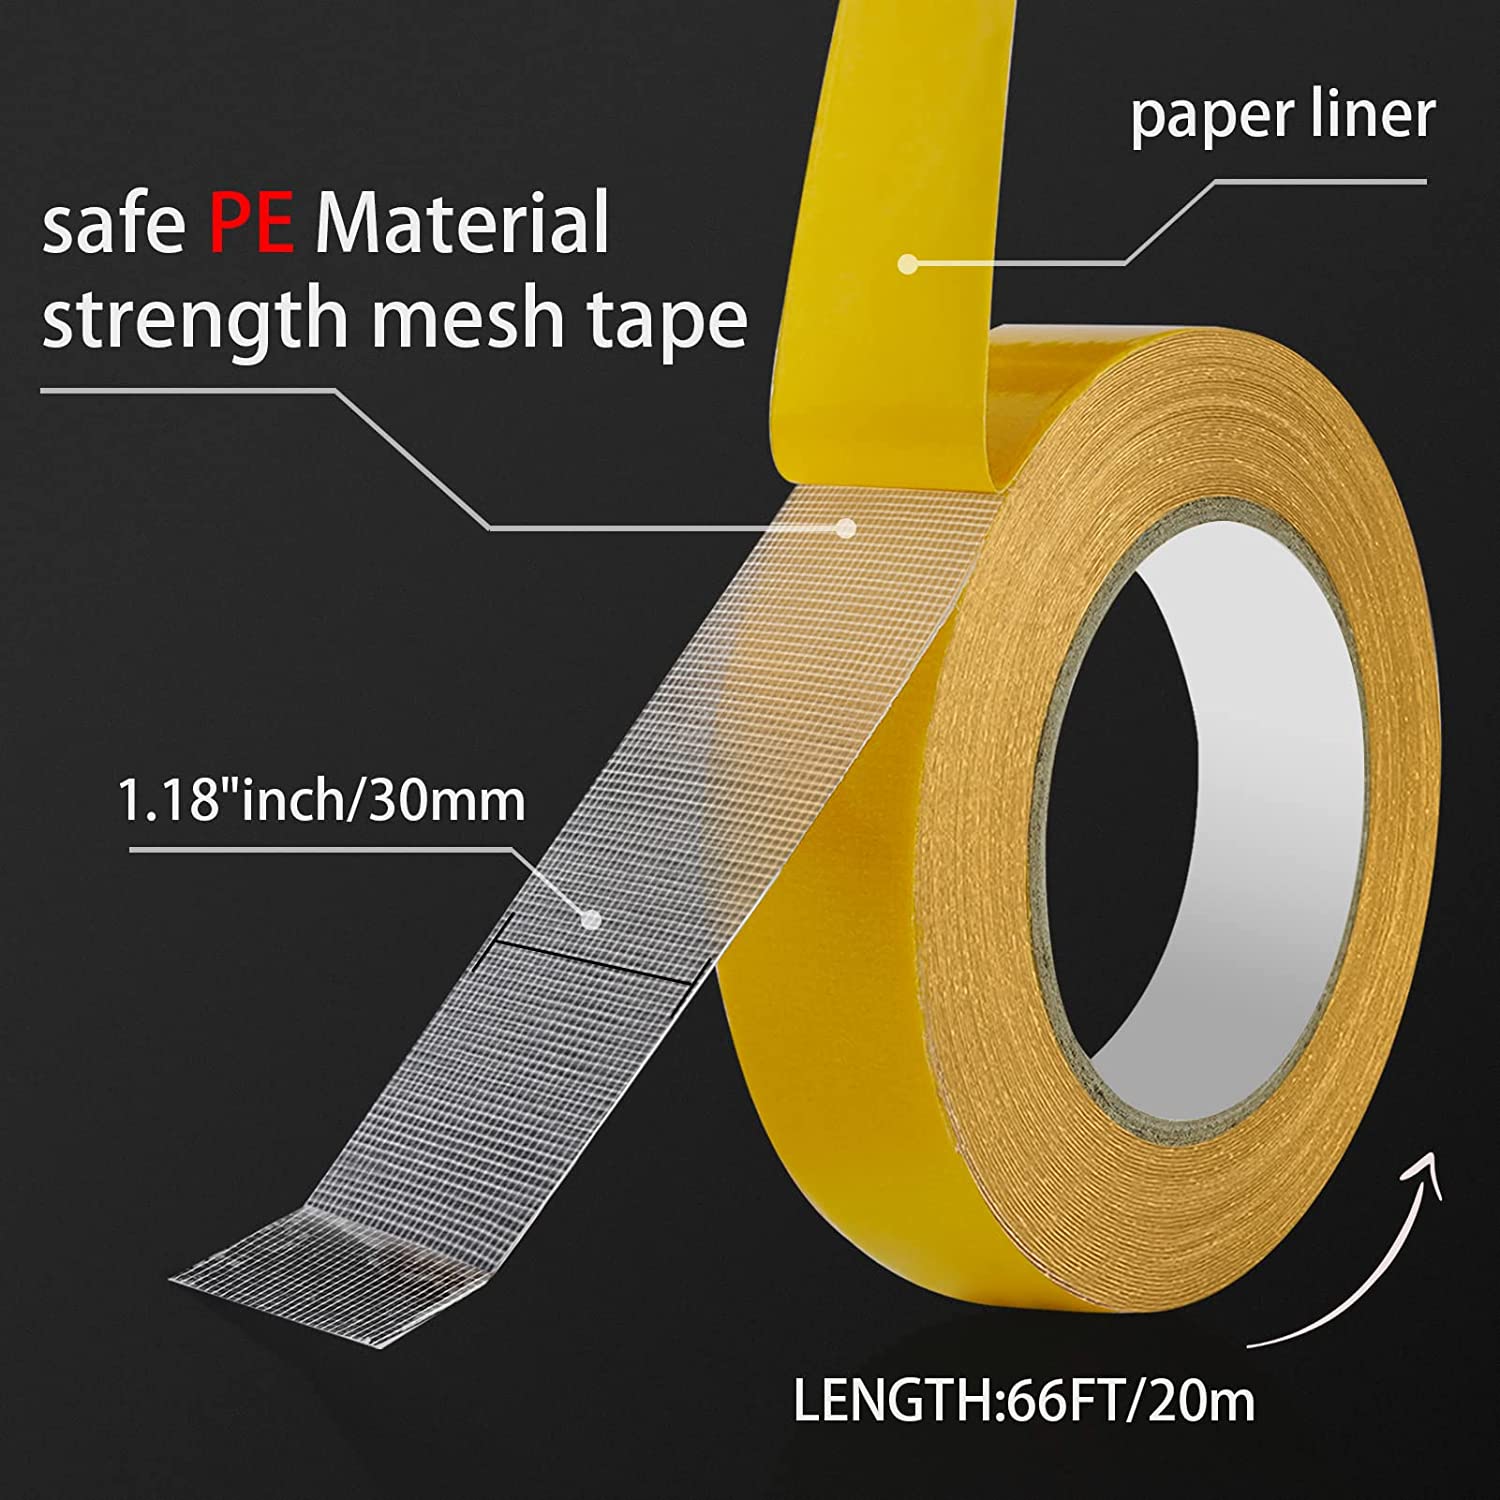 Mounting Tape Heavy Duty 2in x 9.85ft, Double Sided Tape Heavy Duty Picture  Hanging Strips, PE Foam Tape Removable Wall Tape, Strong Adhesive Tape for Carpet  Tape Rug Gripper Poster Sticker 